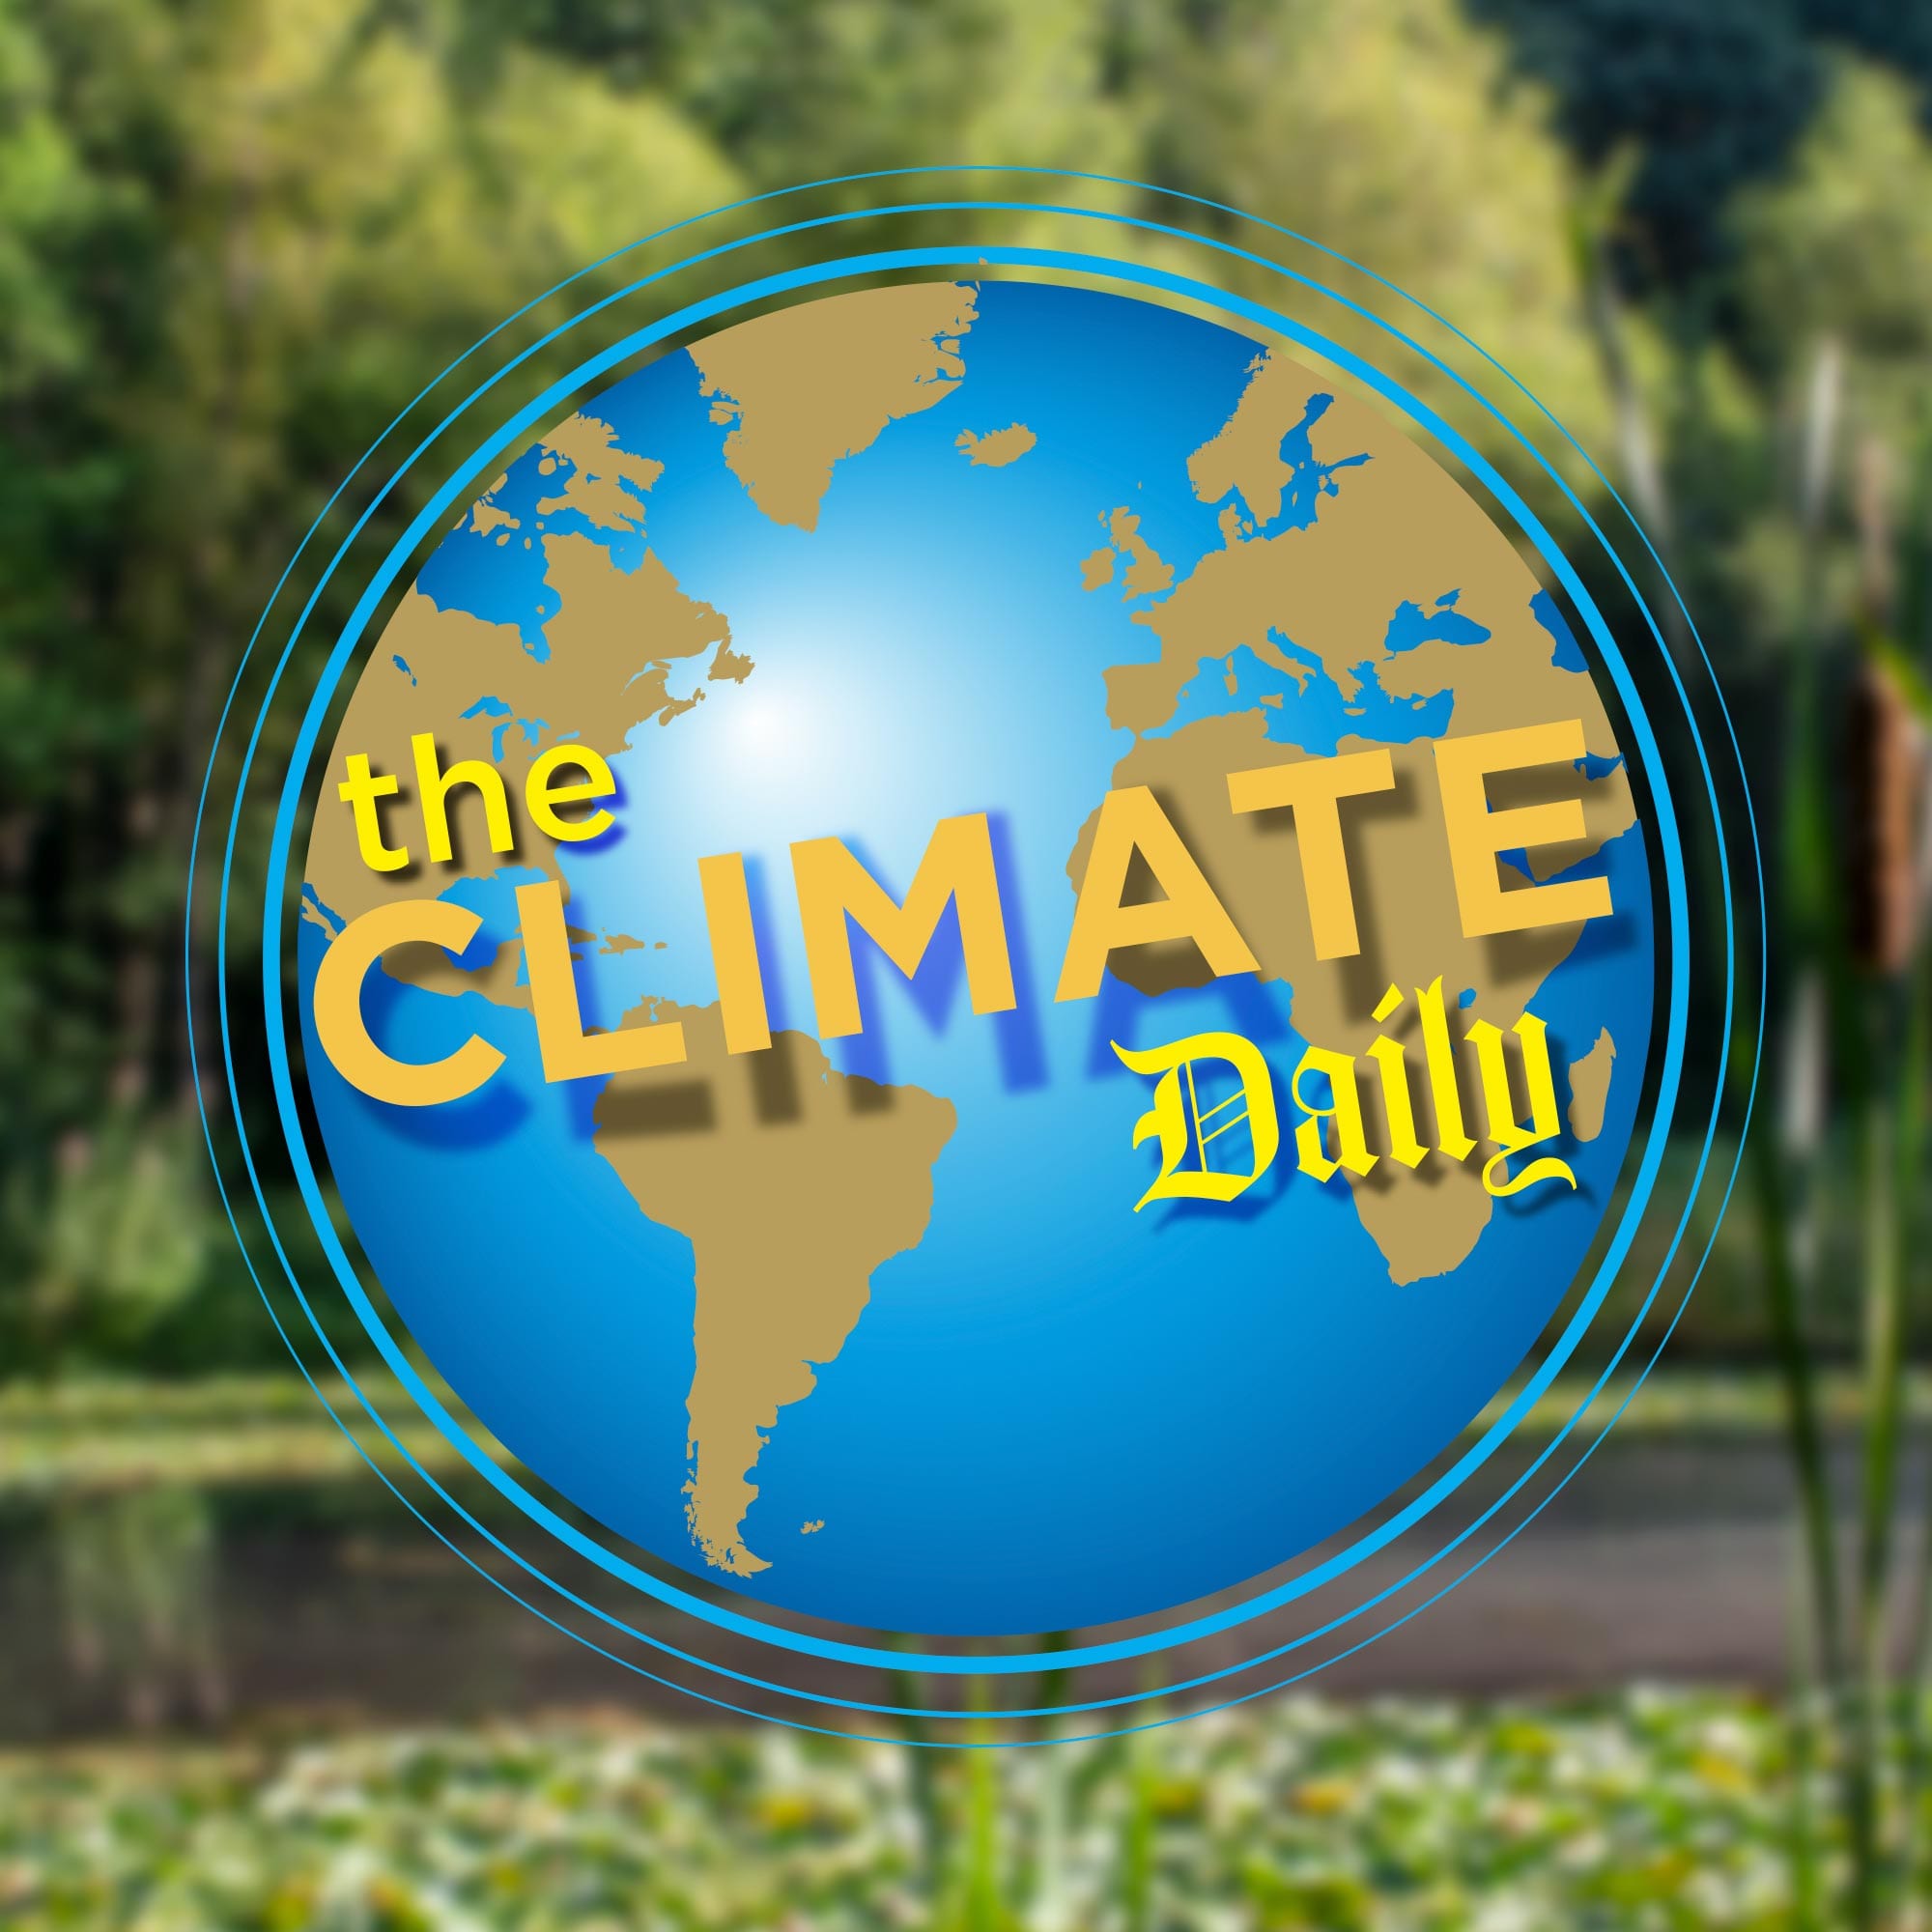 Happy Earth Day! Climate Champion–Dennis Chestnut, plus Stone Cold CO2 Sequestration in Oman. Climate Change Arts Project, “Down To Earth,” and Arizona State University and the Audubon Society Earth Day Events